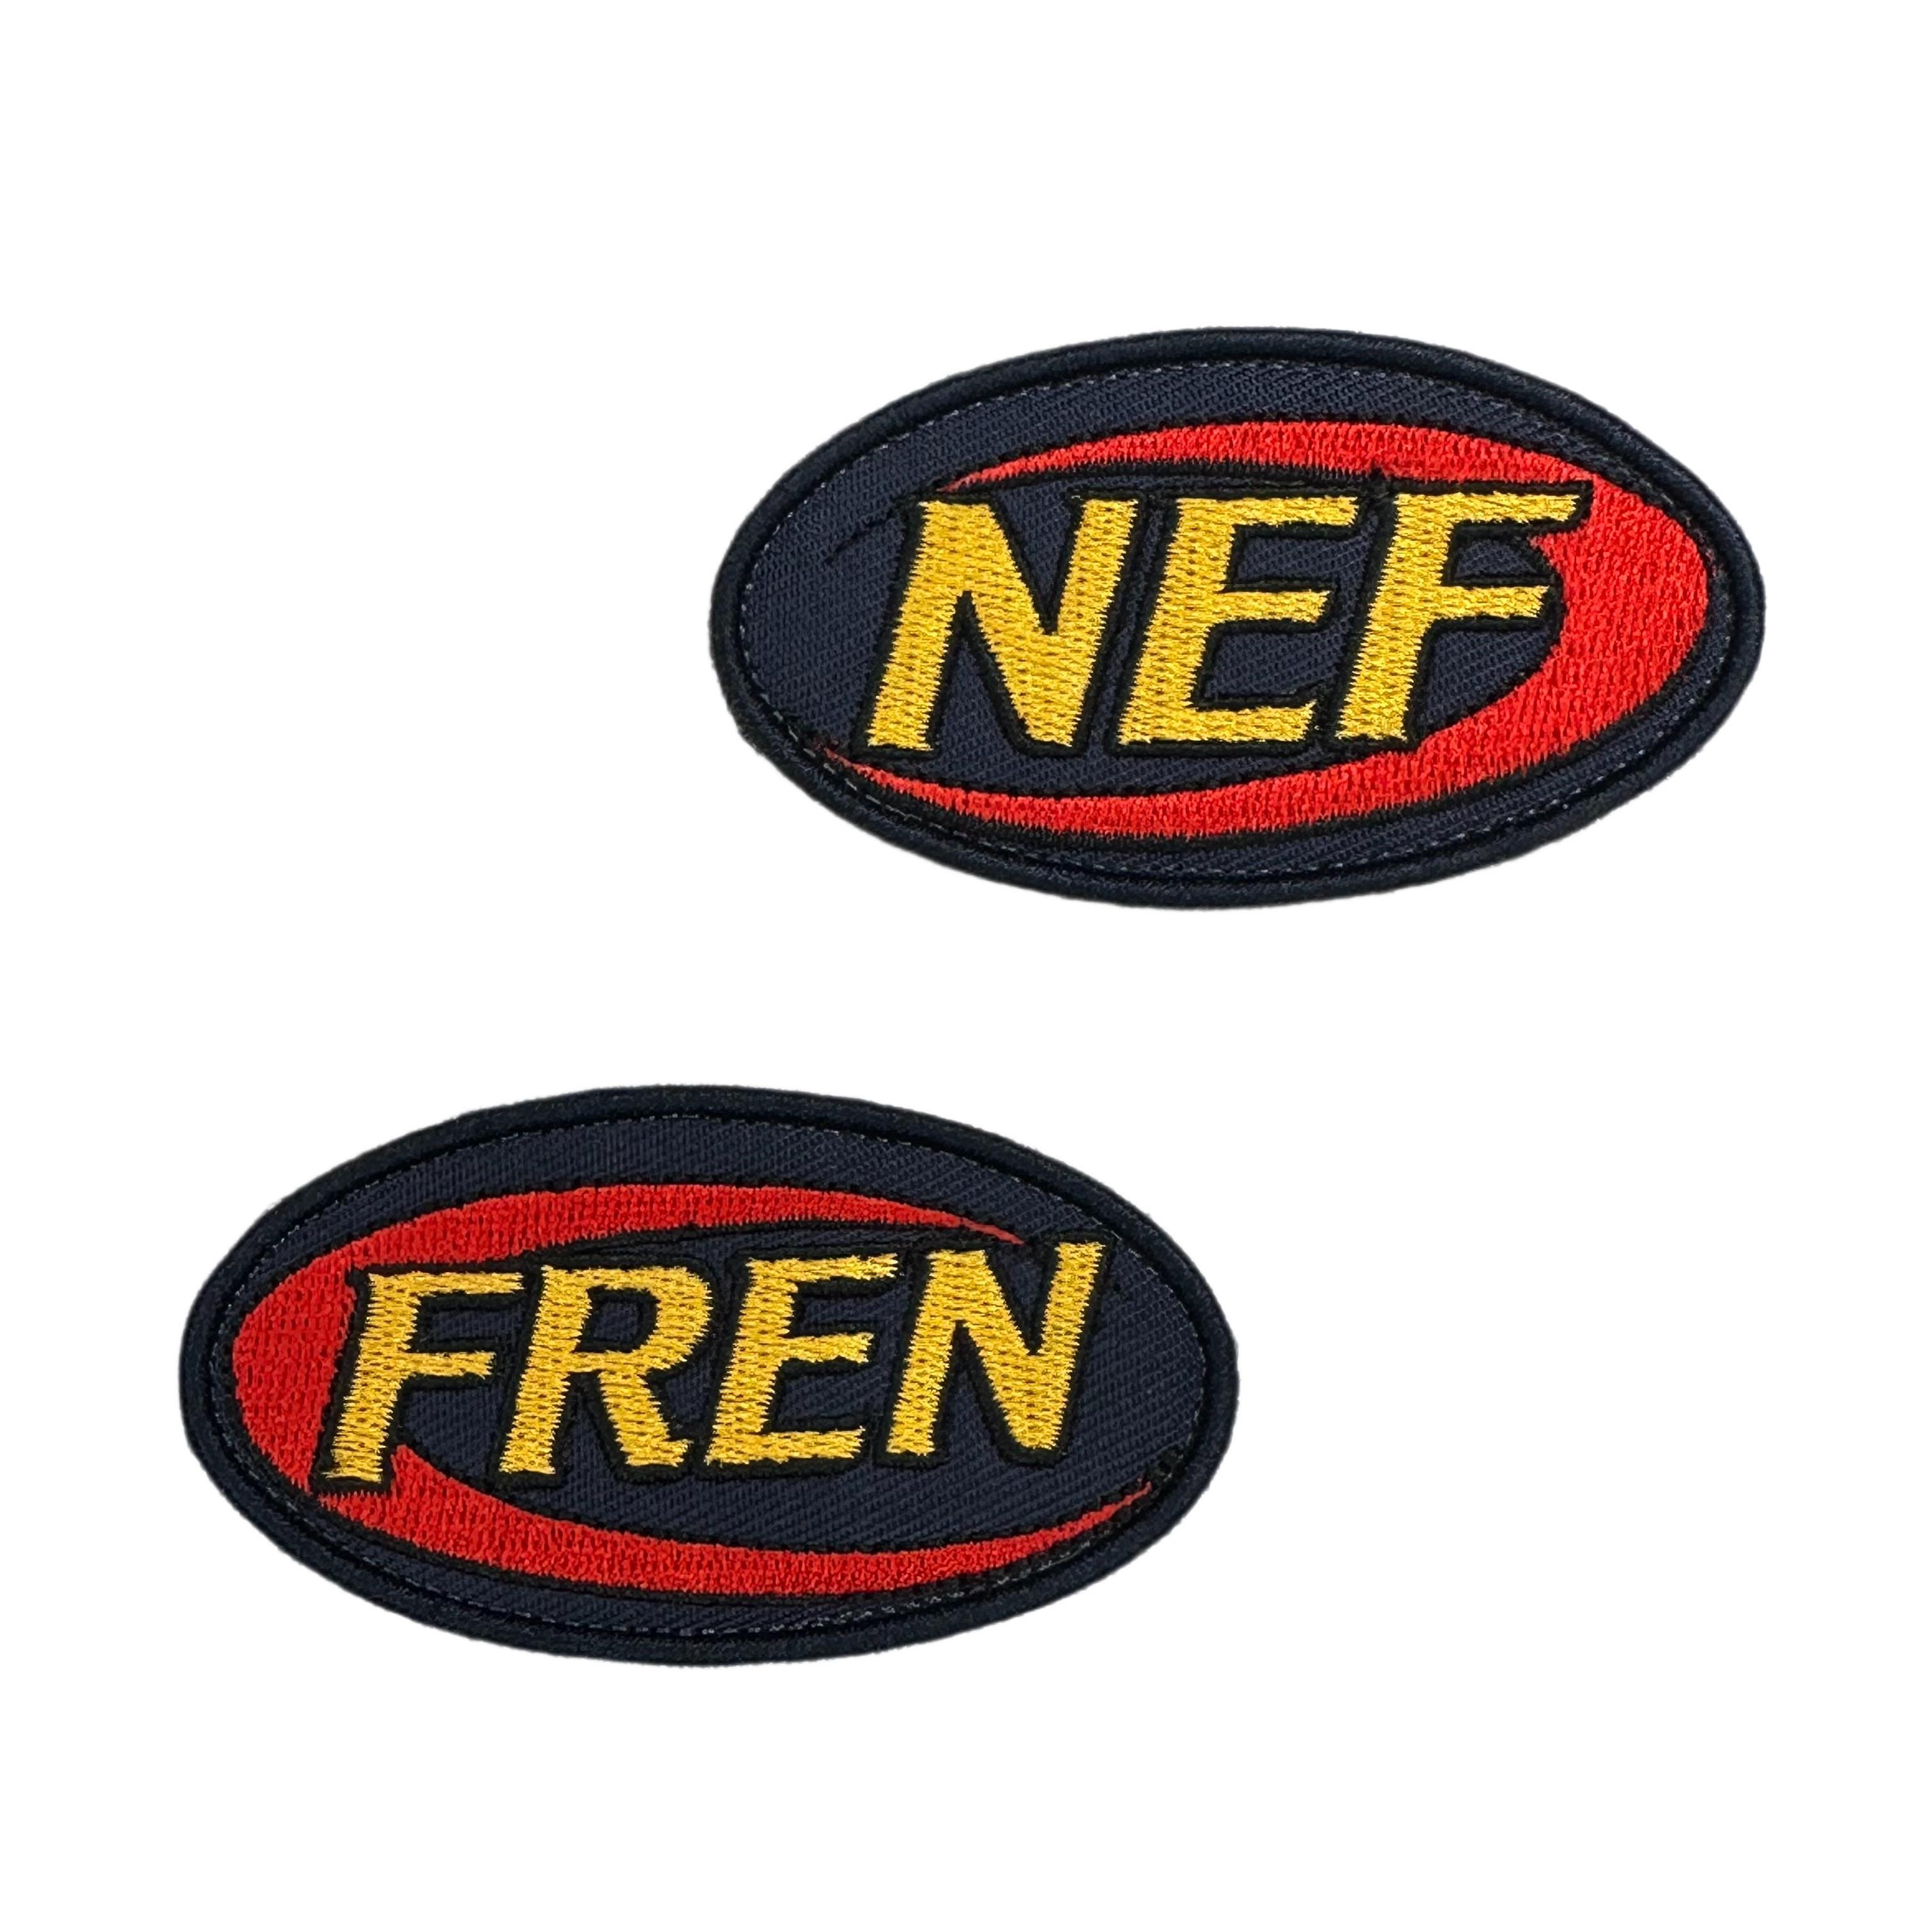 FREN - Nerf Reverse Logo Inspired Embroidered Velcro Morale Patch